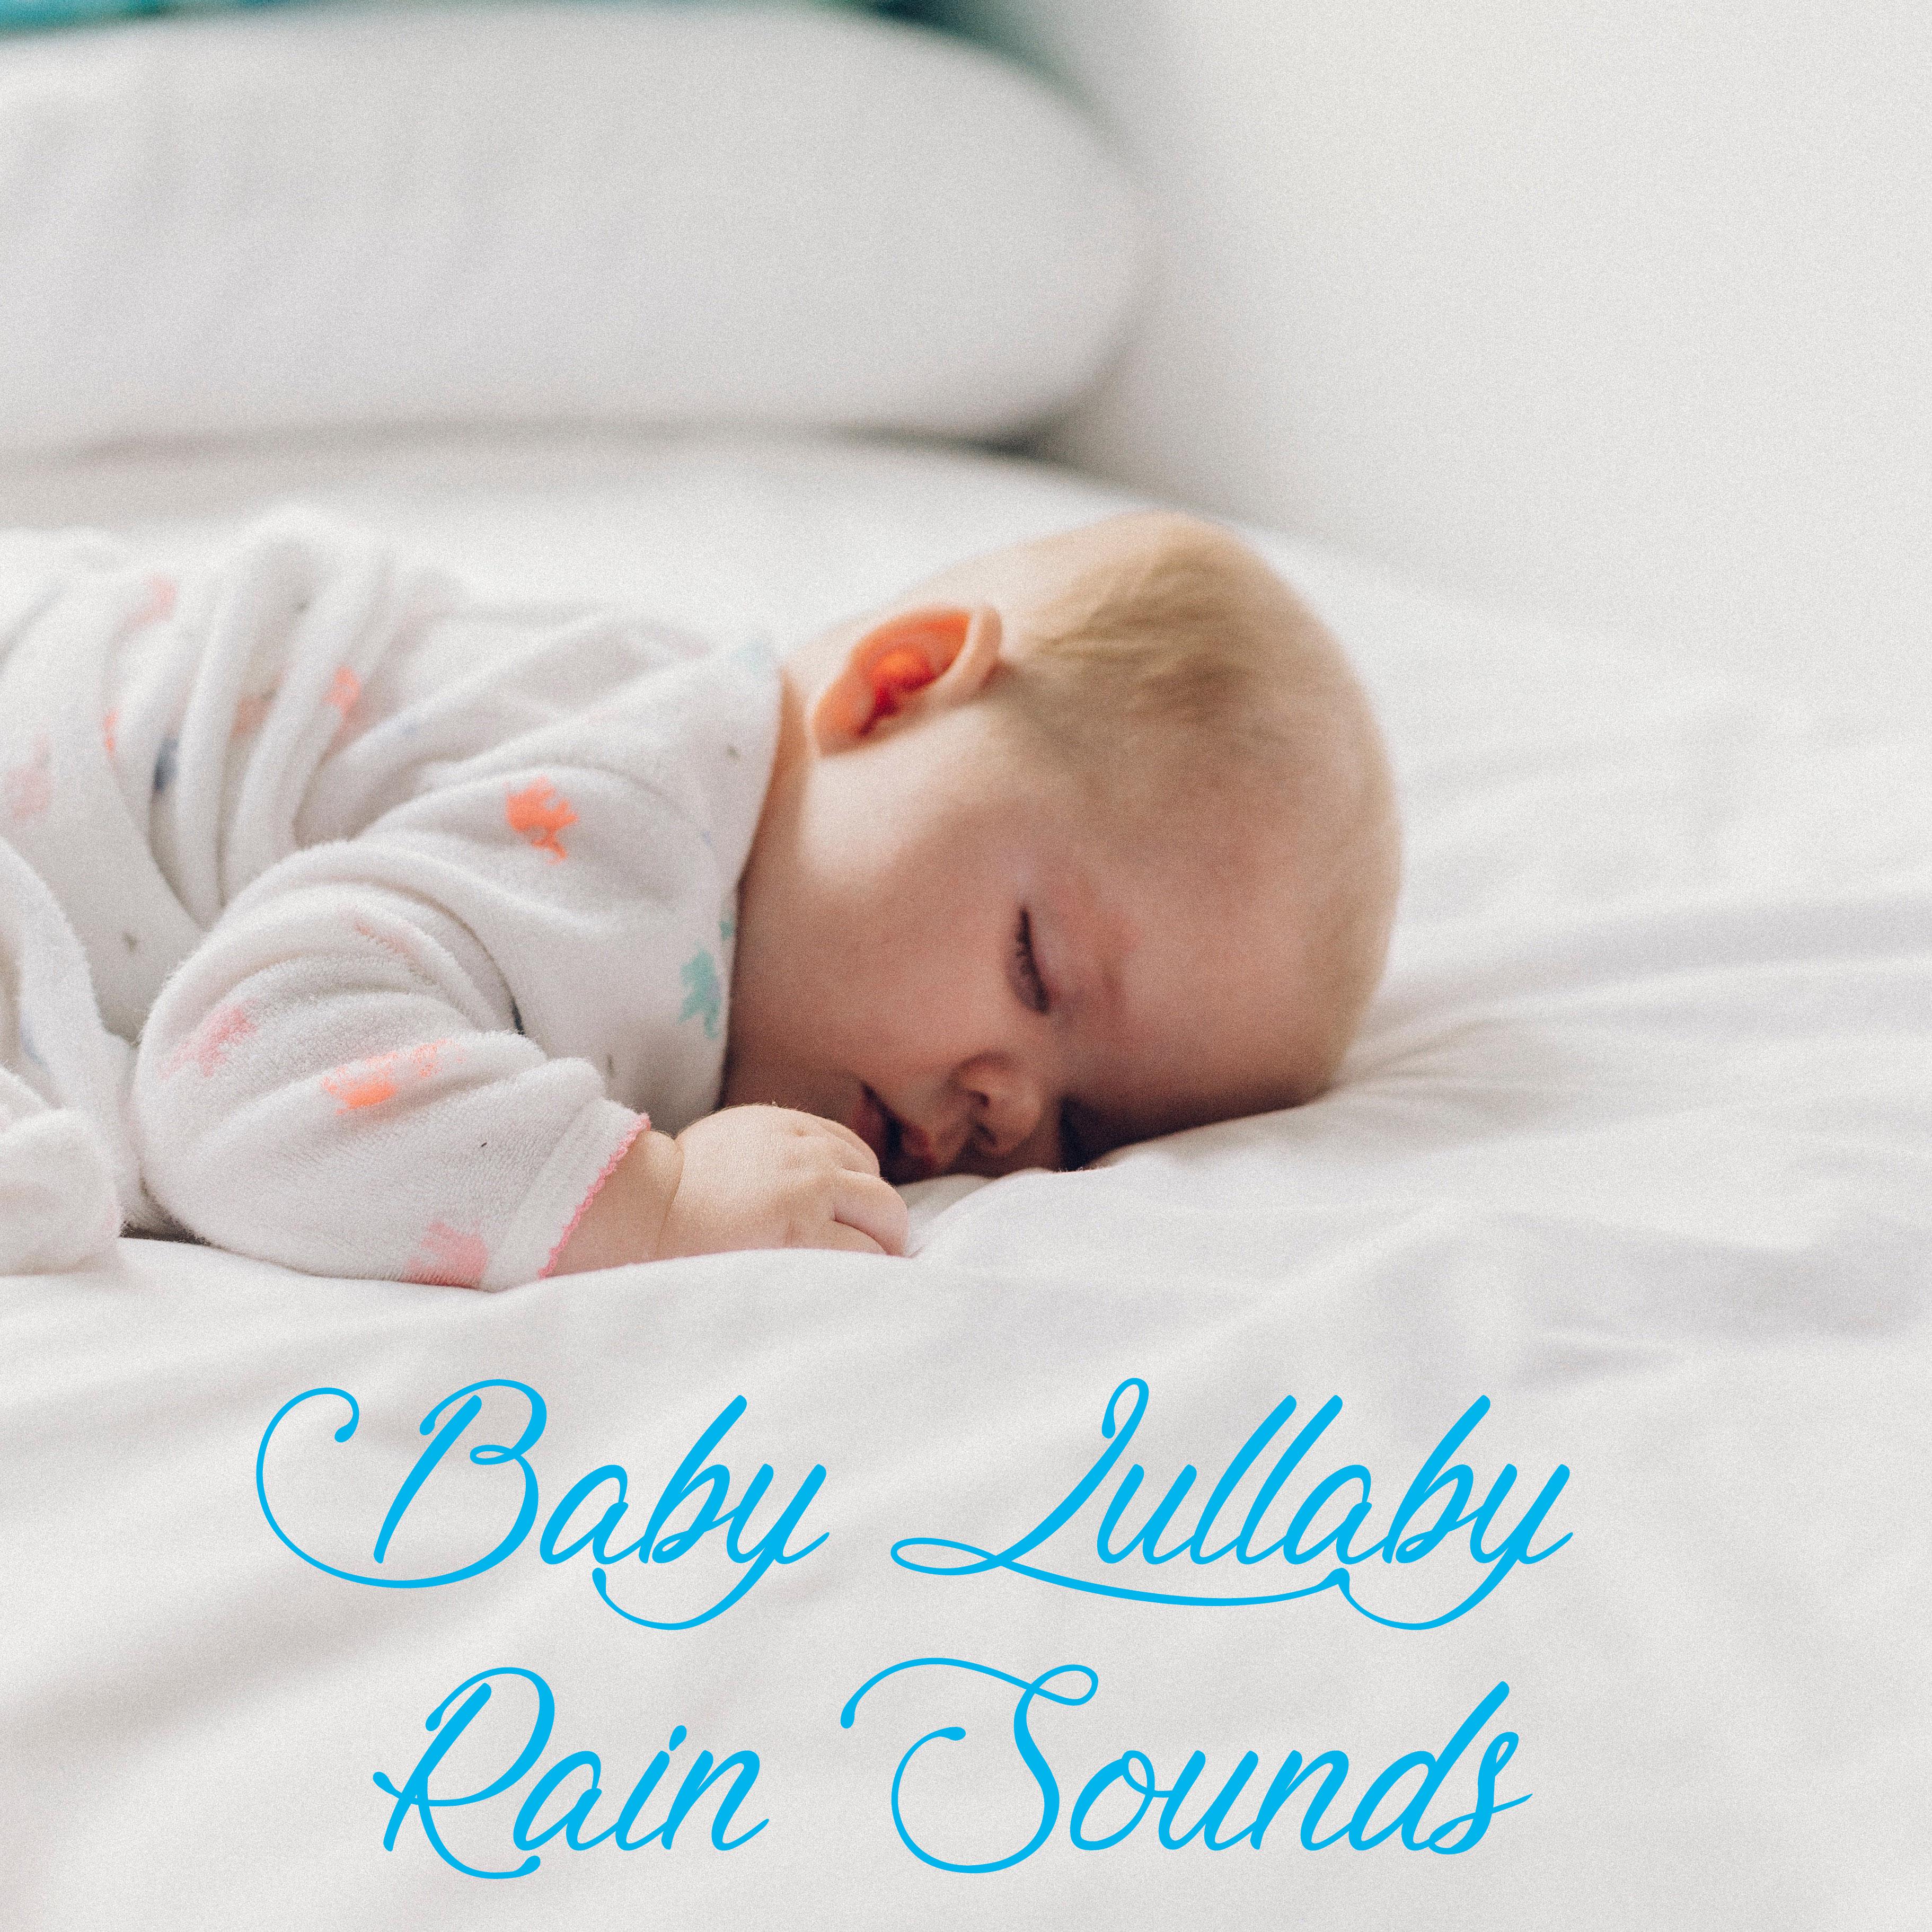 17 Baby Lullaby Sounds of Rain. White Noise, Meditation and Sleep Aid